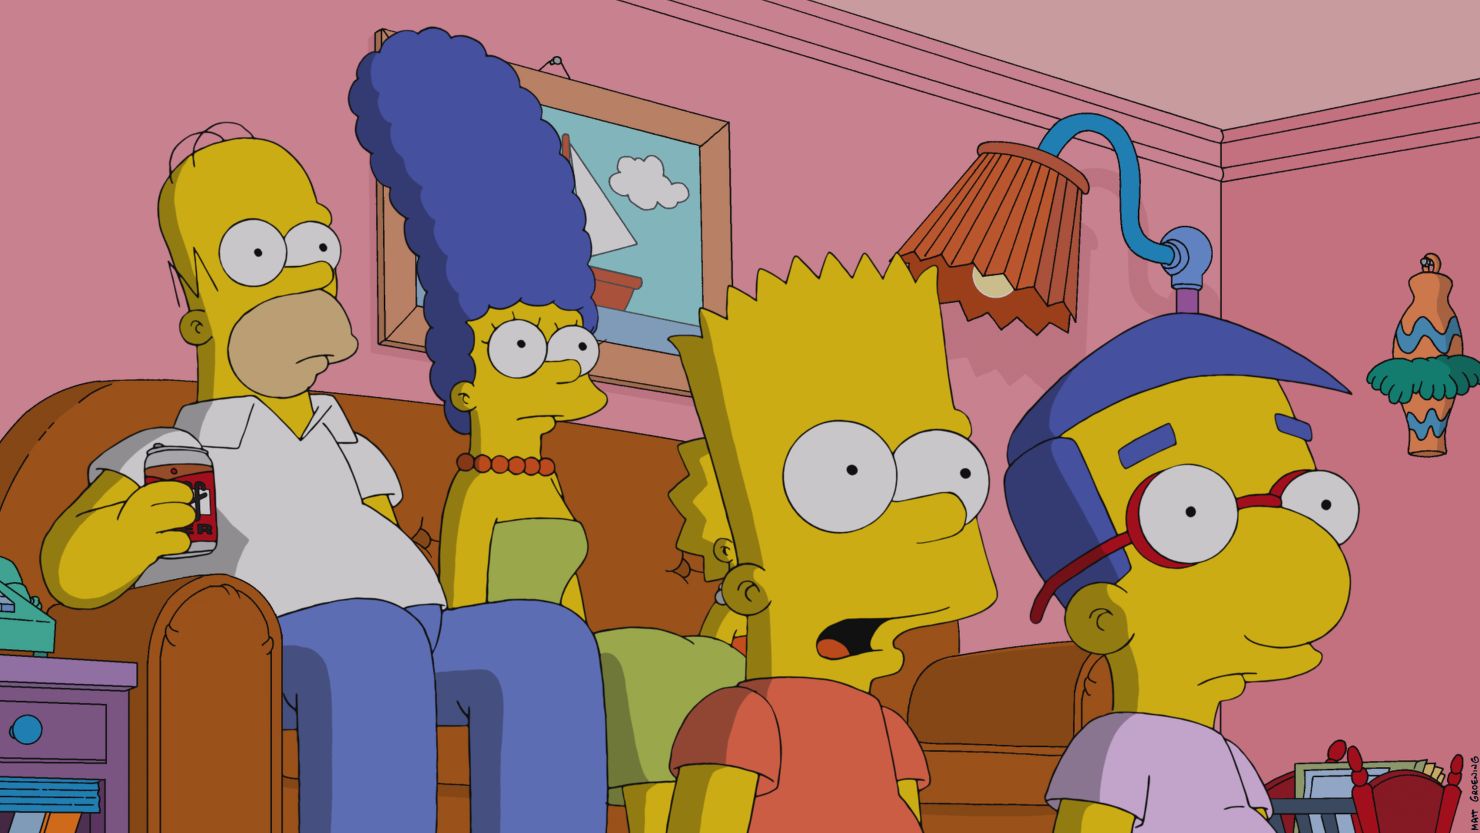 "The Simpsons" will meet their "Tracey Ullman" show counterparts in this year's Halloween episode. 